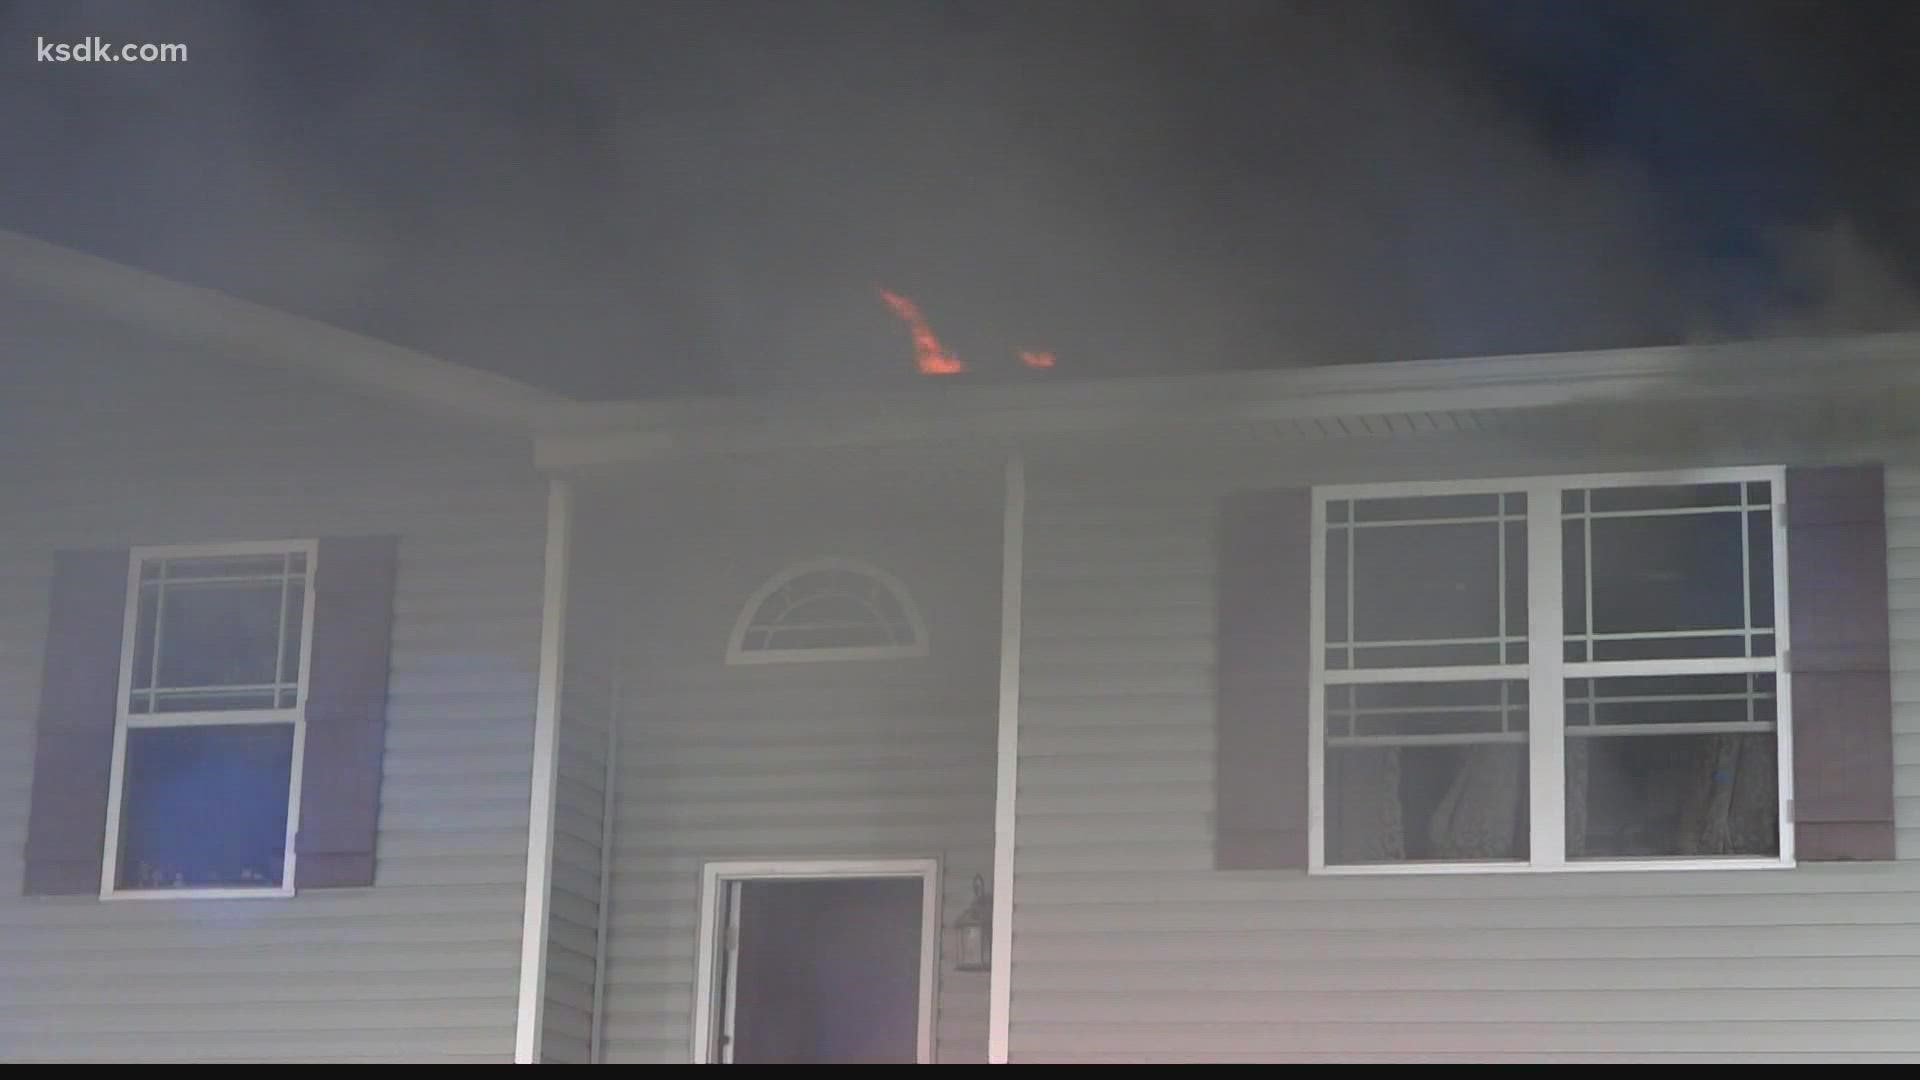 The fire happened just before 1 a.m. in Dupo, Illinois.